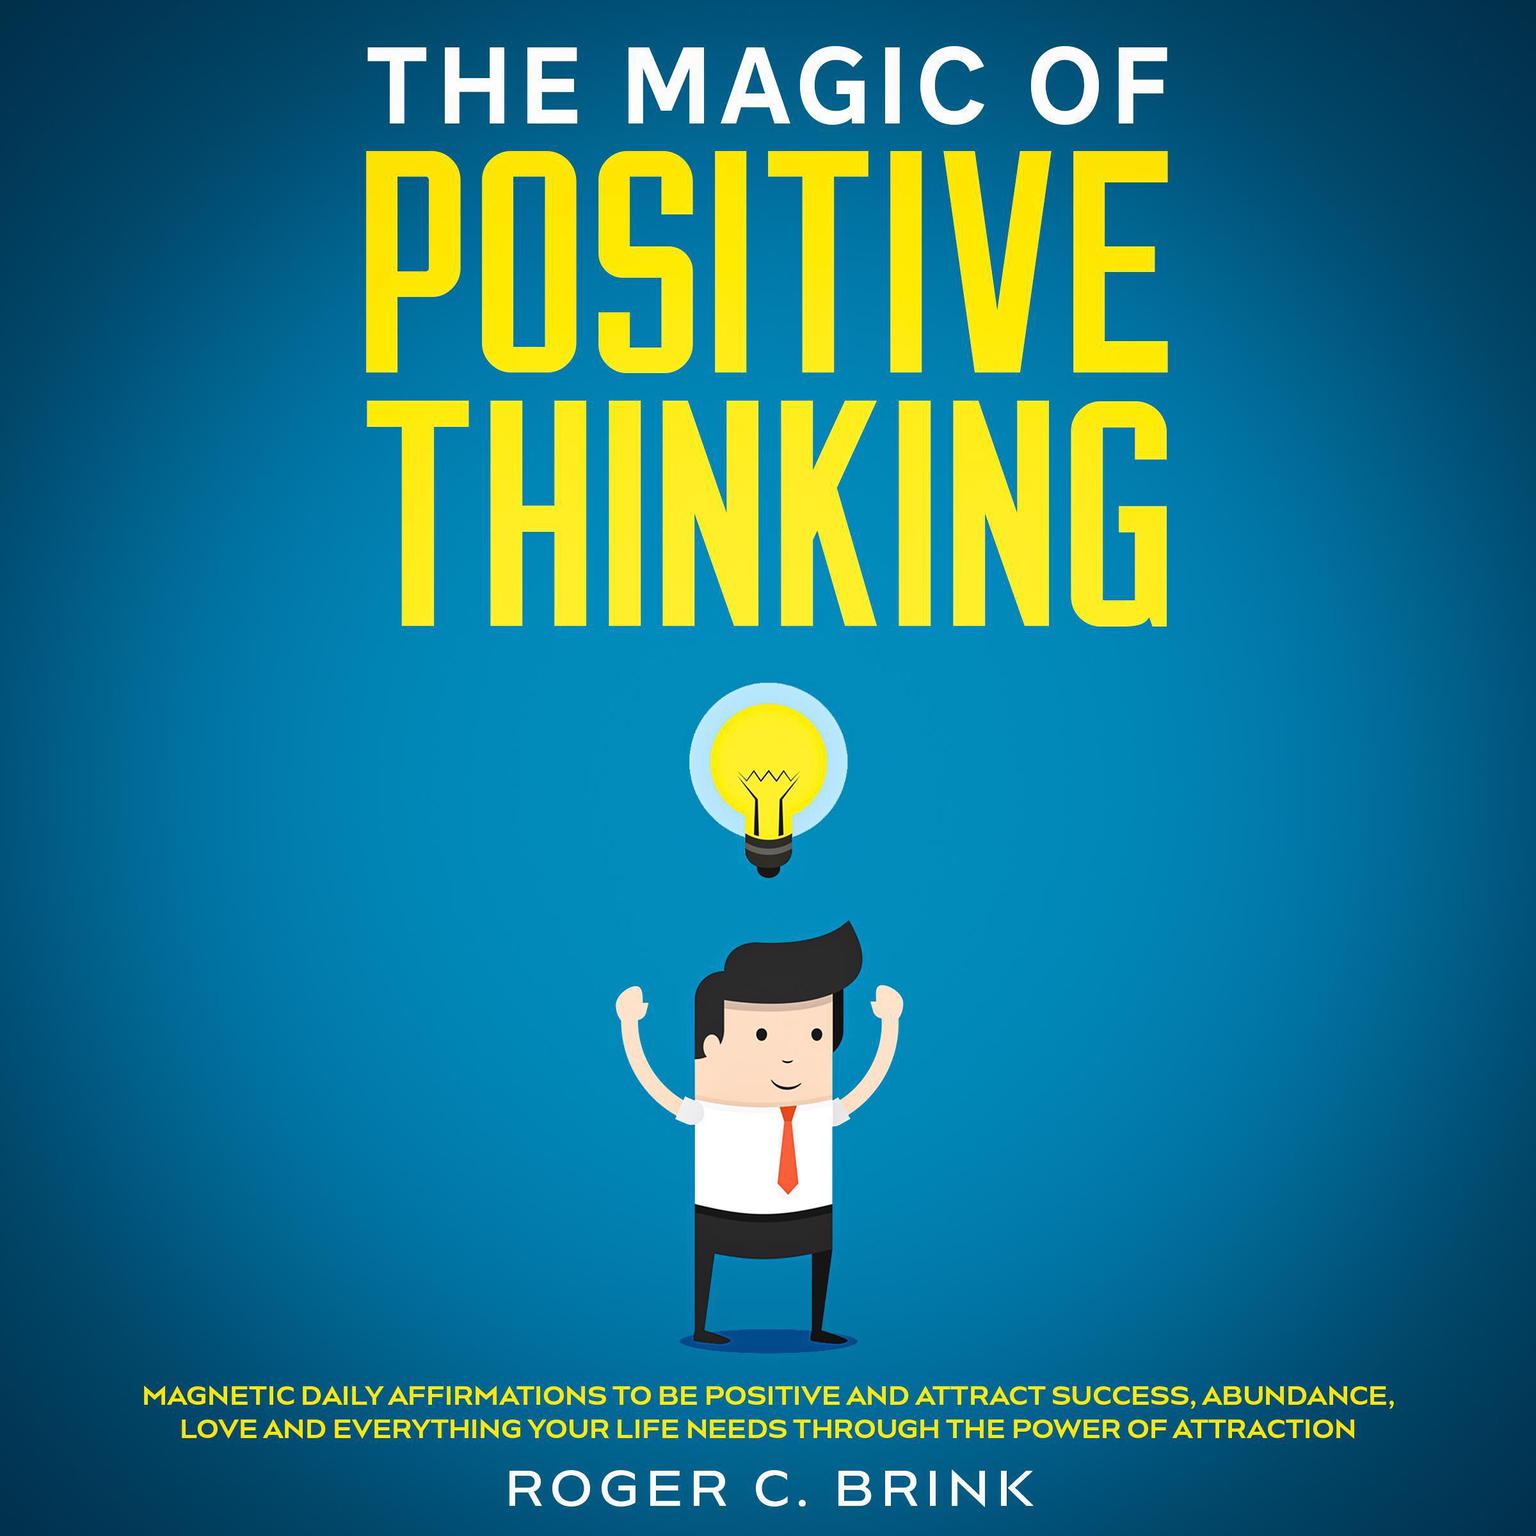 The Magic of Positive Thinking Magnetic Daily Affirmations to Be Positive and Attract Success, Abundance, Love and Everything Your Life Needs Through The Power of Attraction Audiobook, by Roger C. Brink